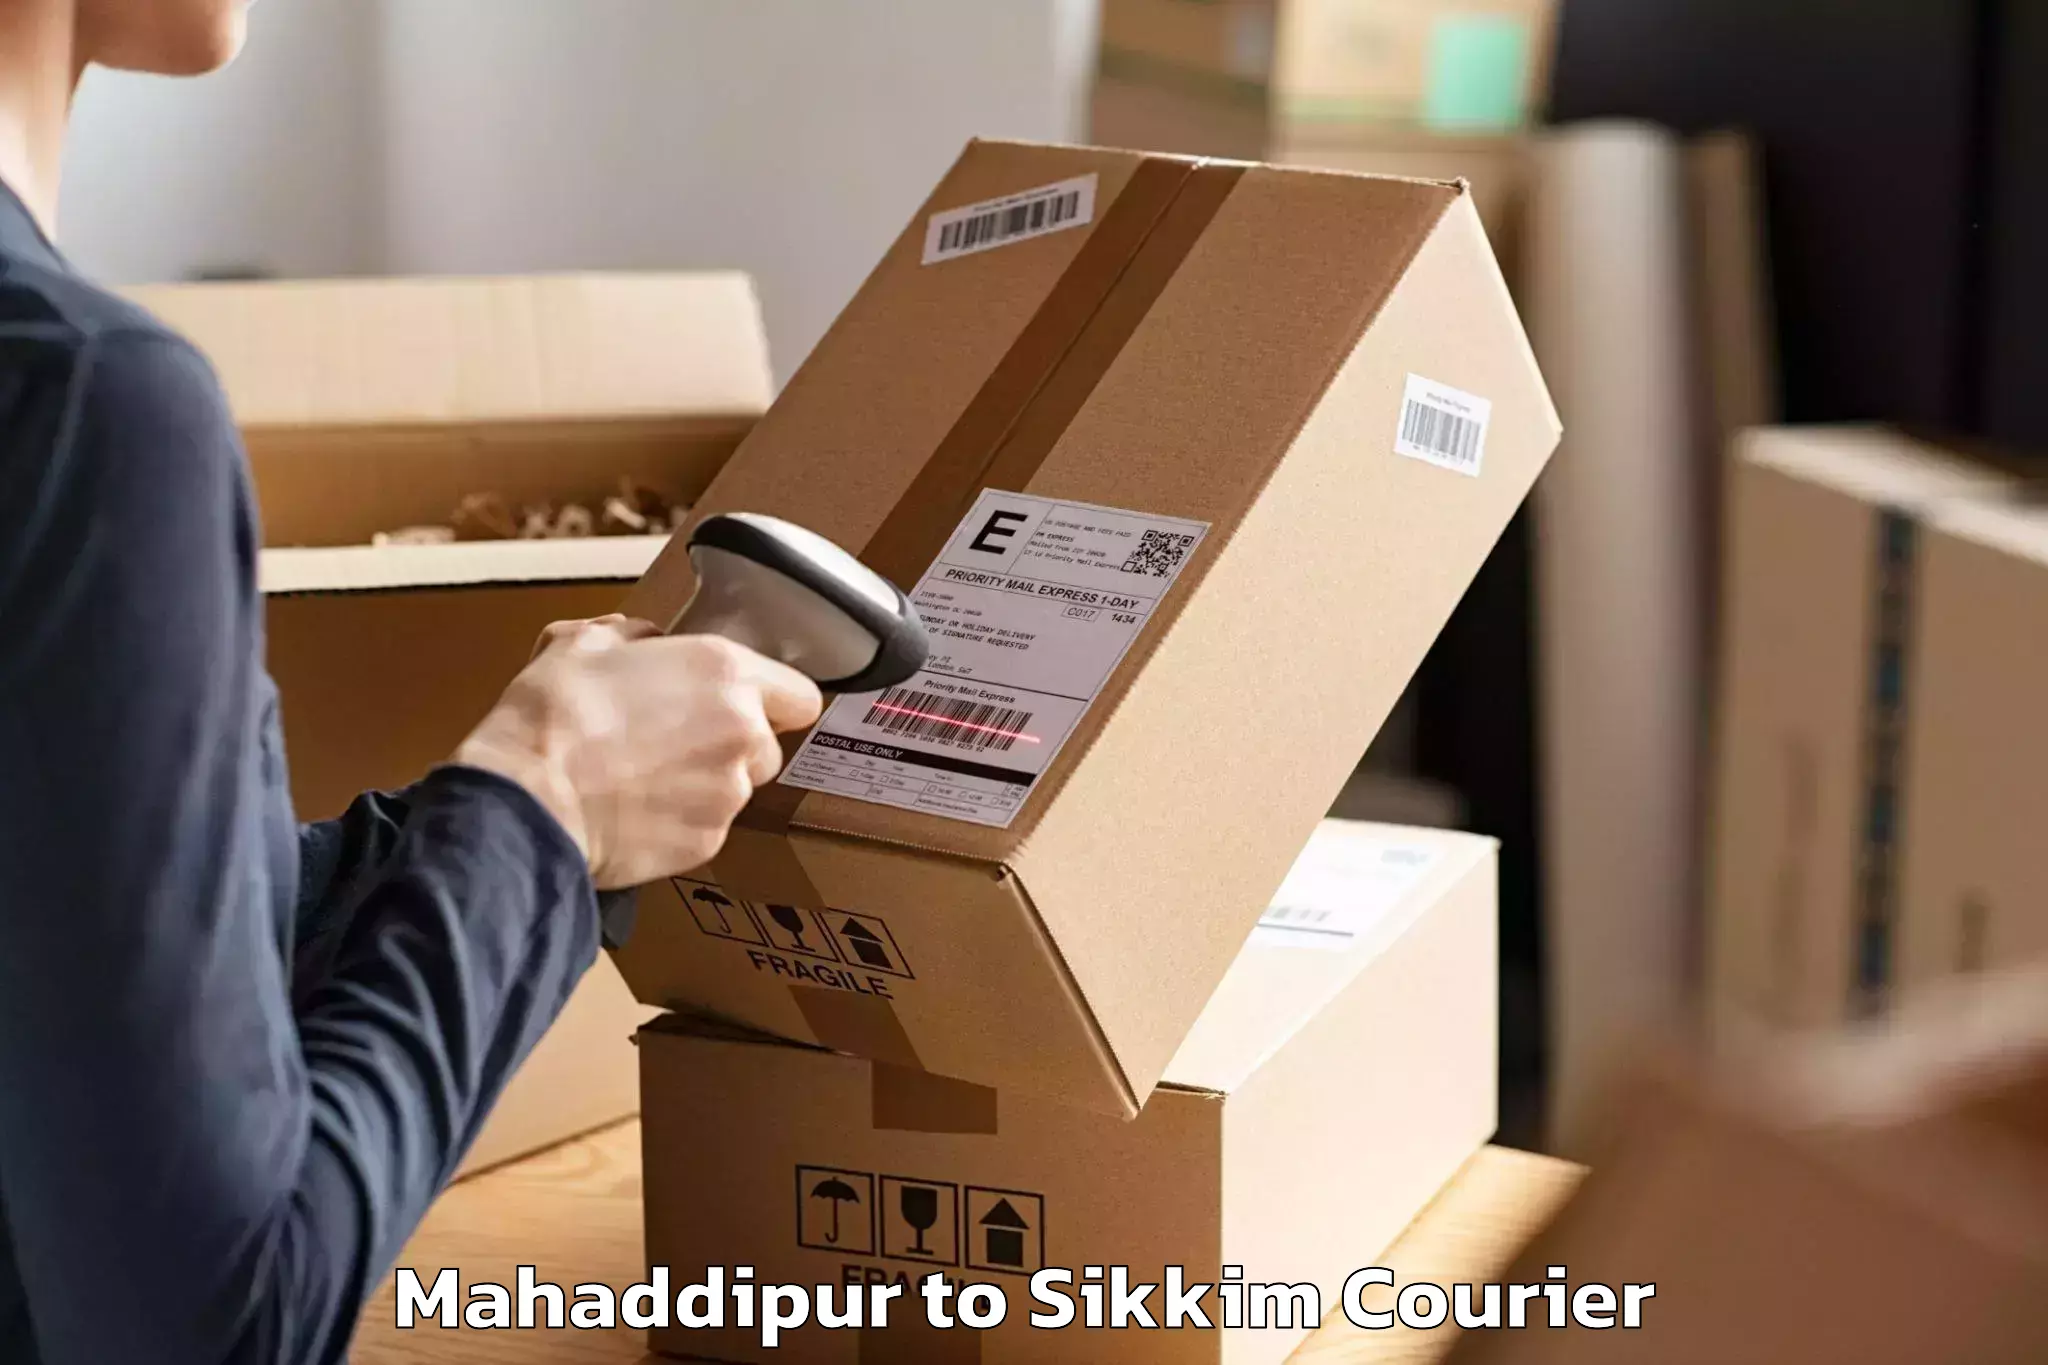 Trusted relocation experts Mahaddipur to West Sikkim